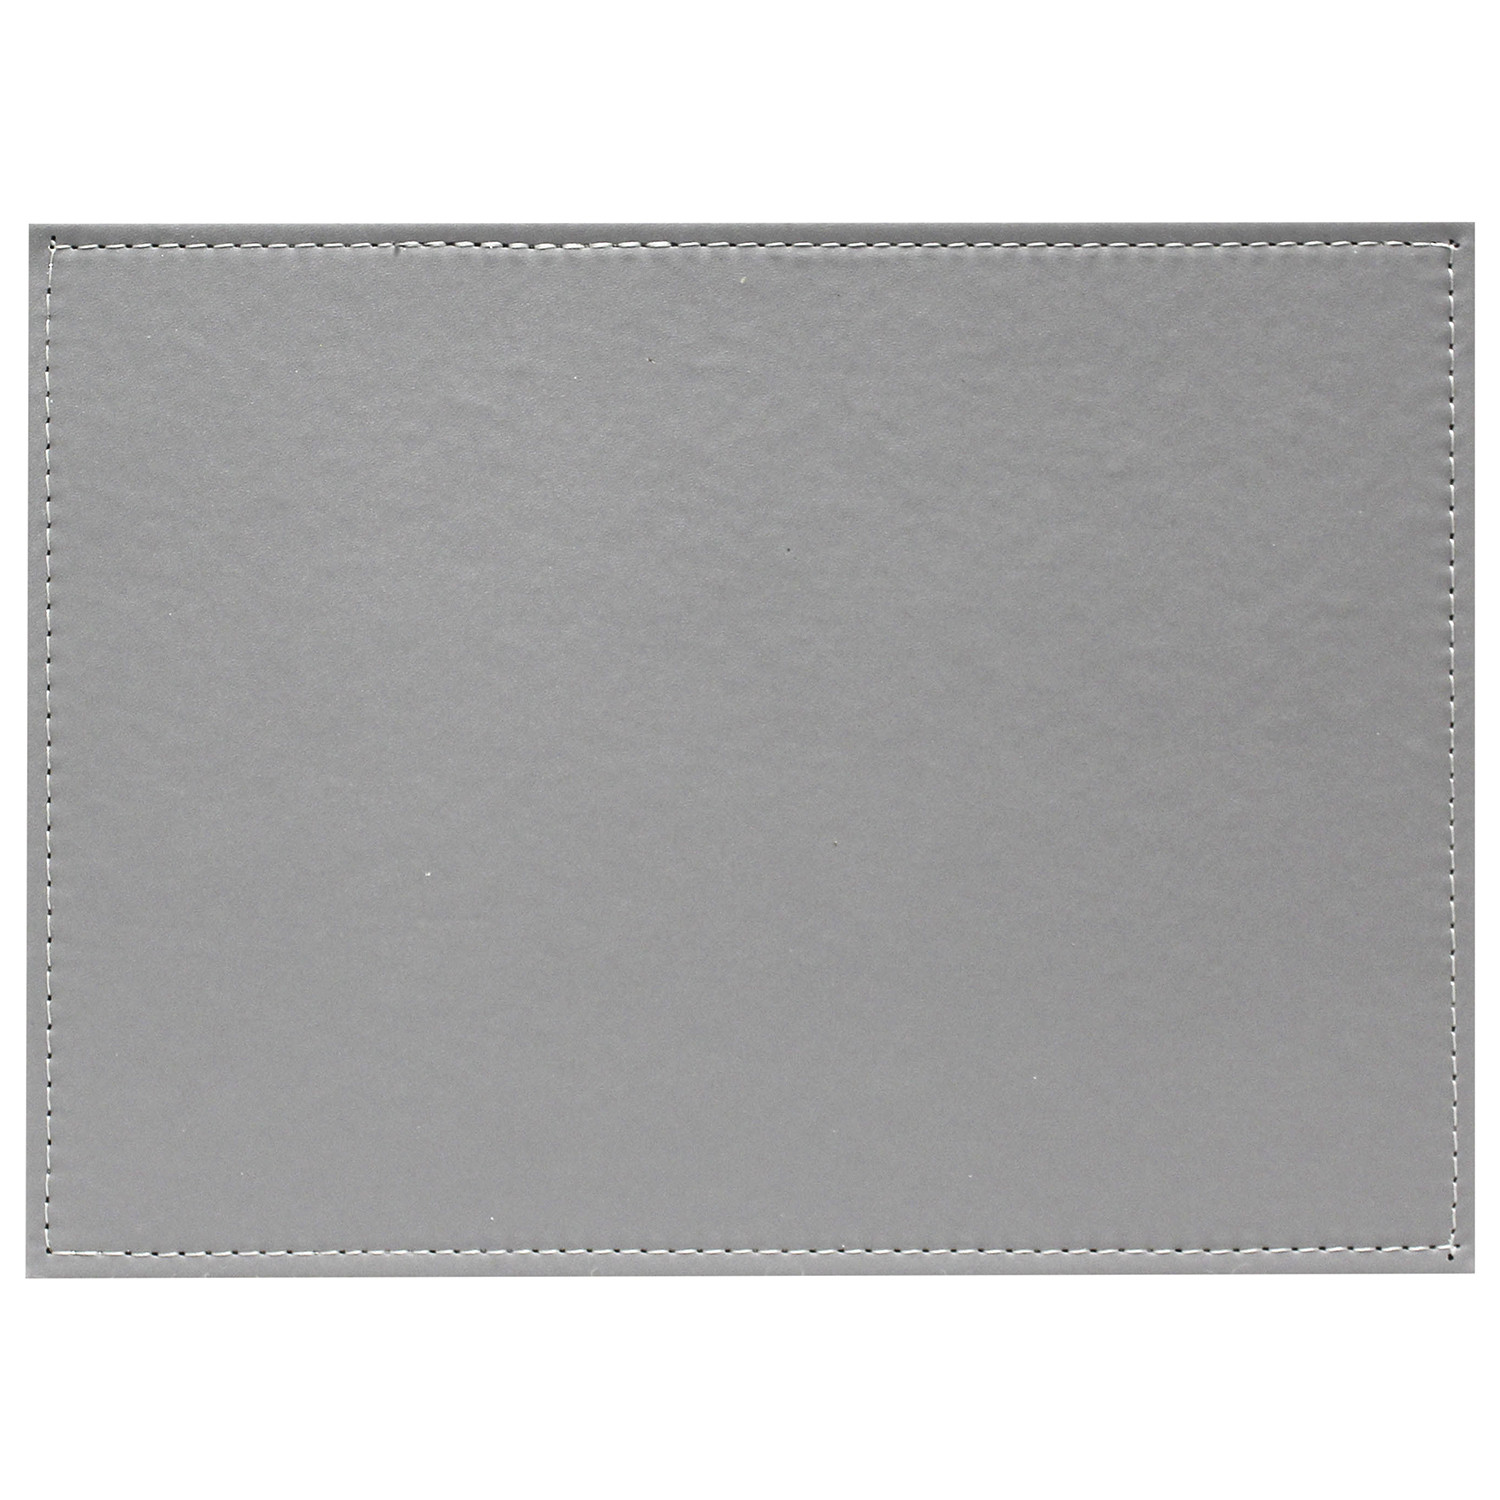 Grey Faux Leather Placemats 4 Pack Image